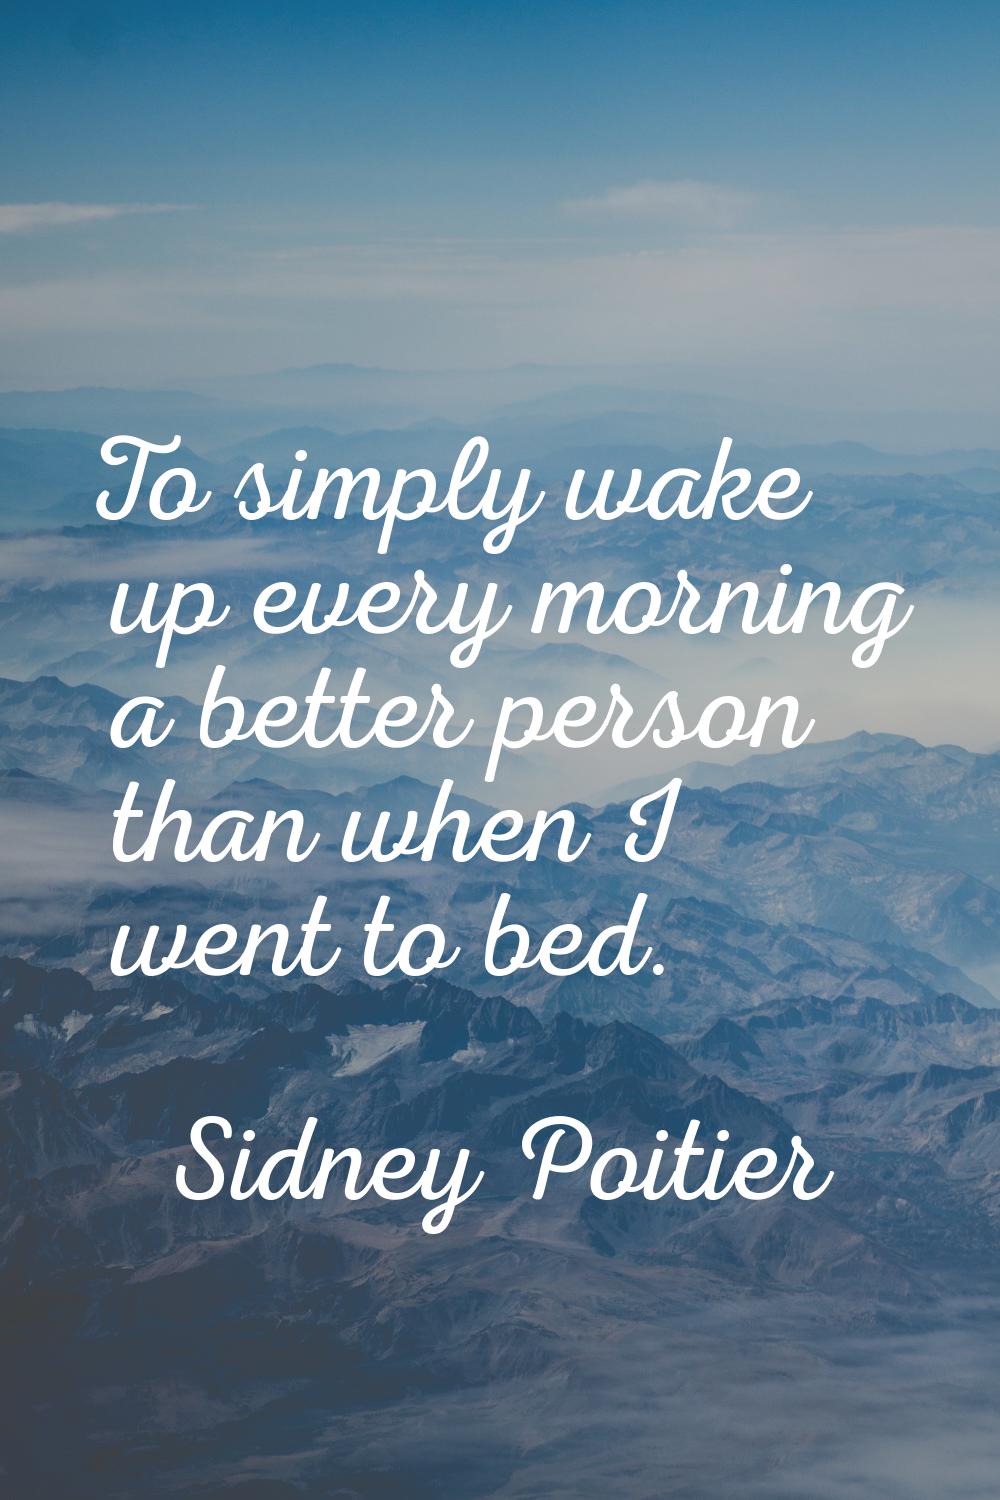 To simply wake up every morning a better person than when I went to bed.